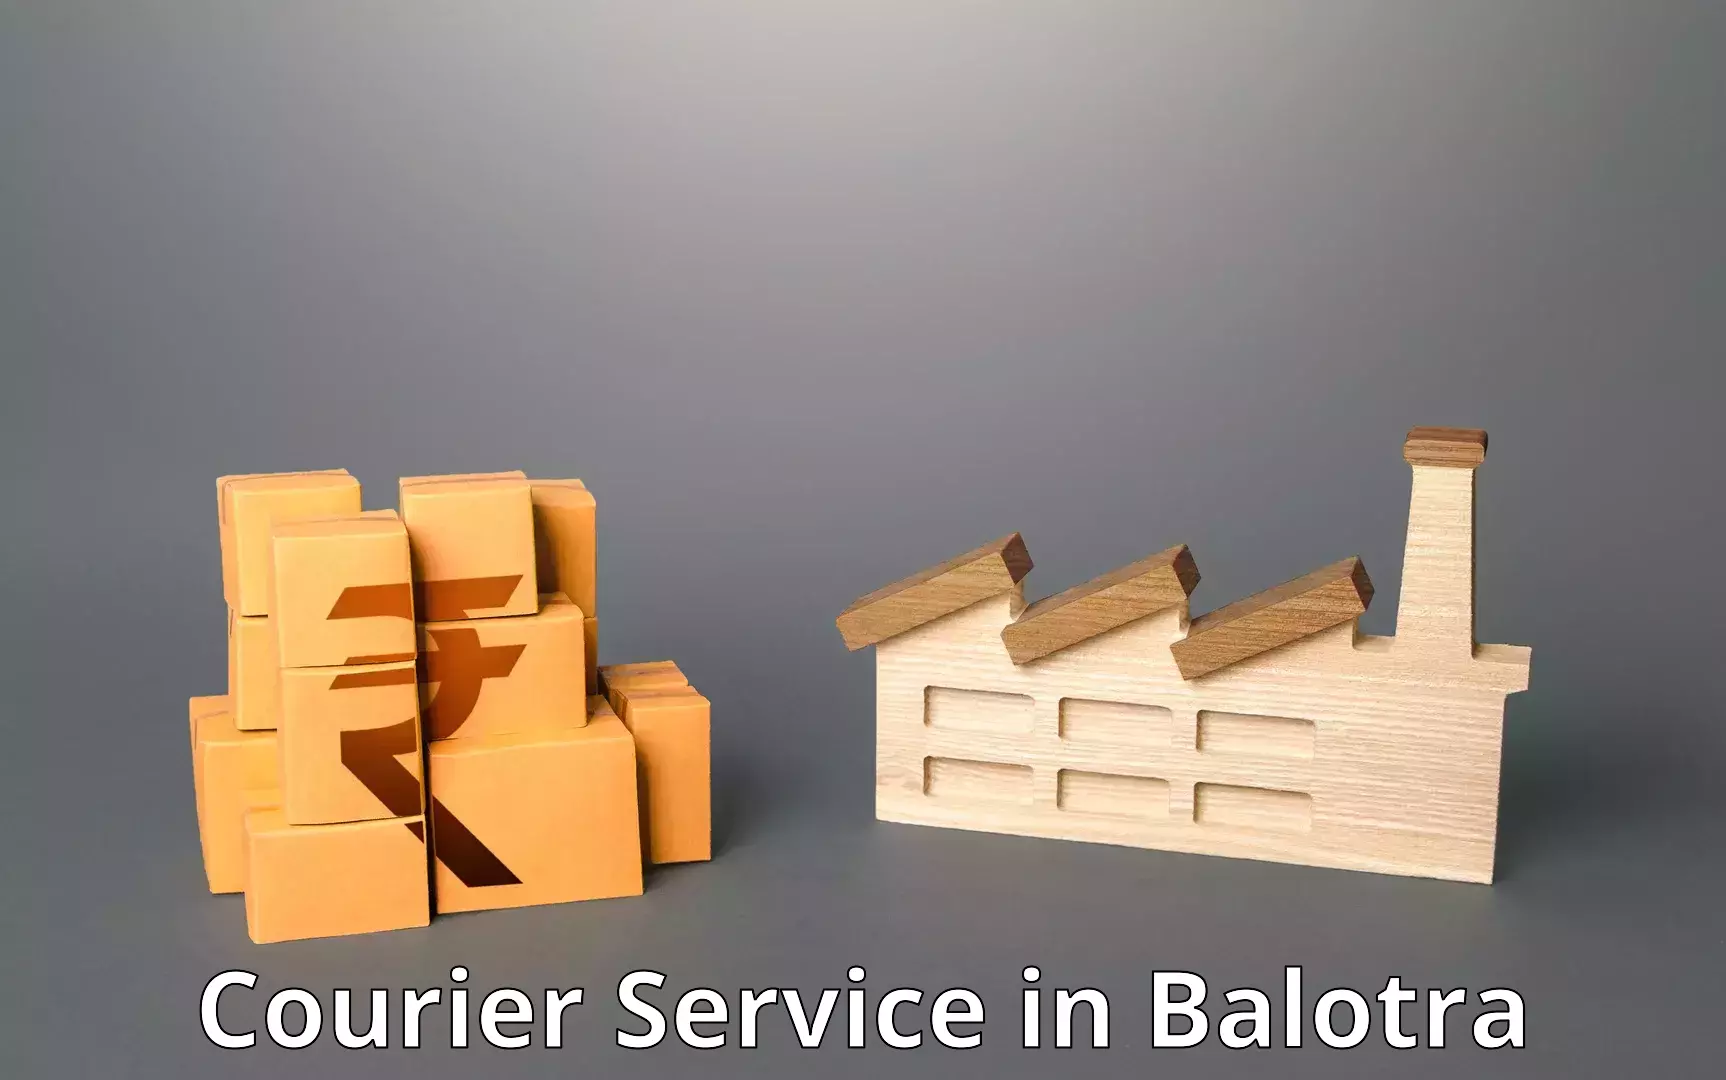 Business delivery service in Balotra